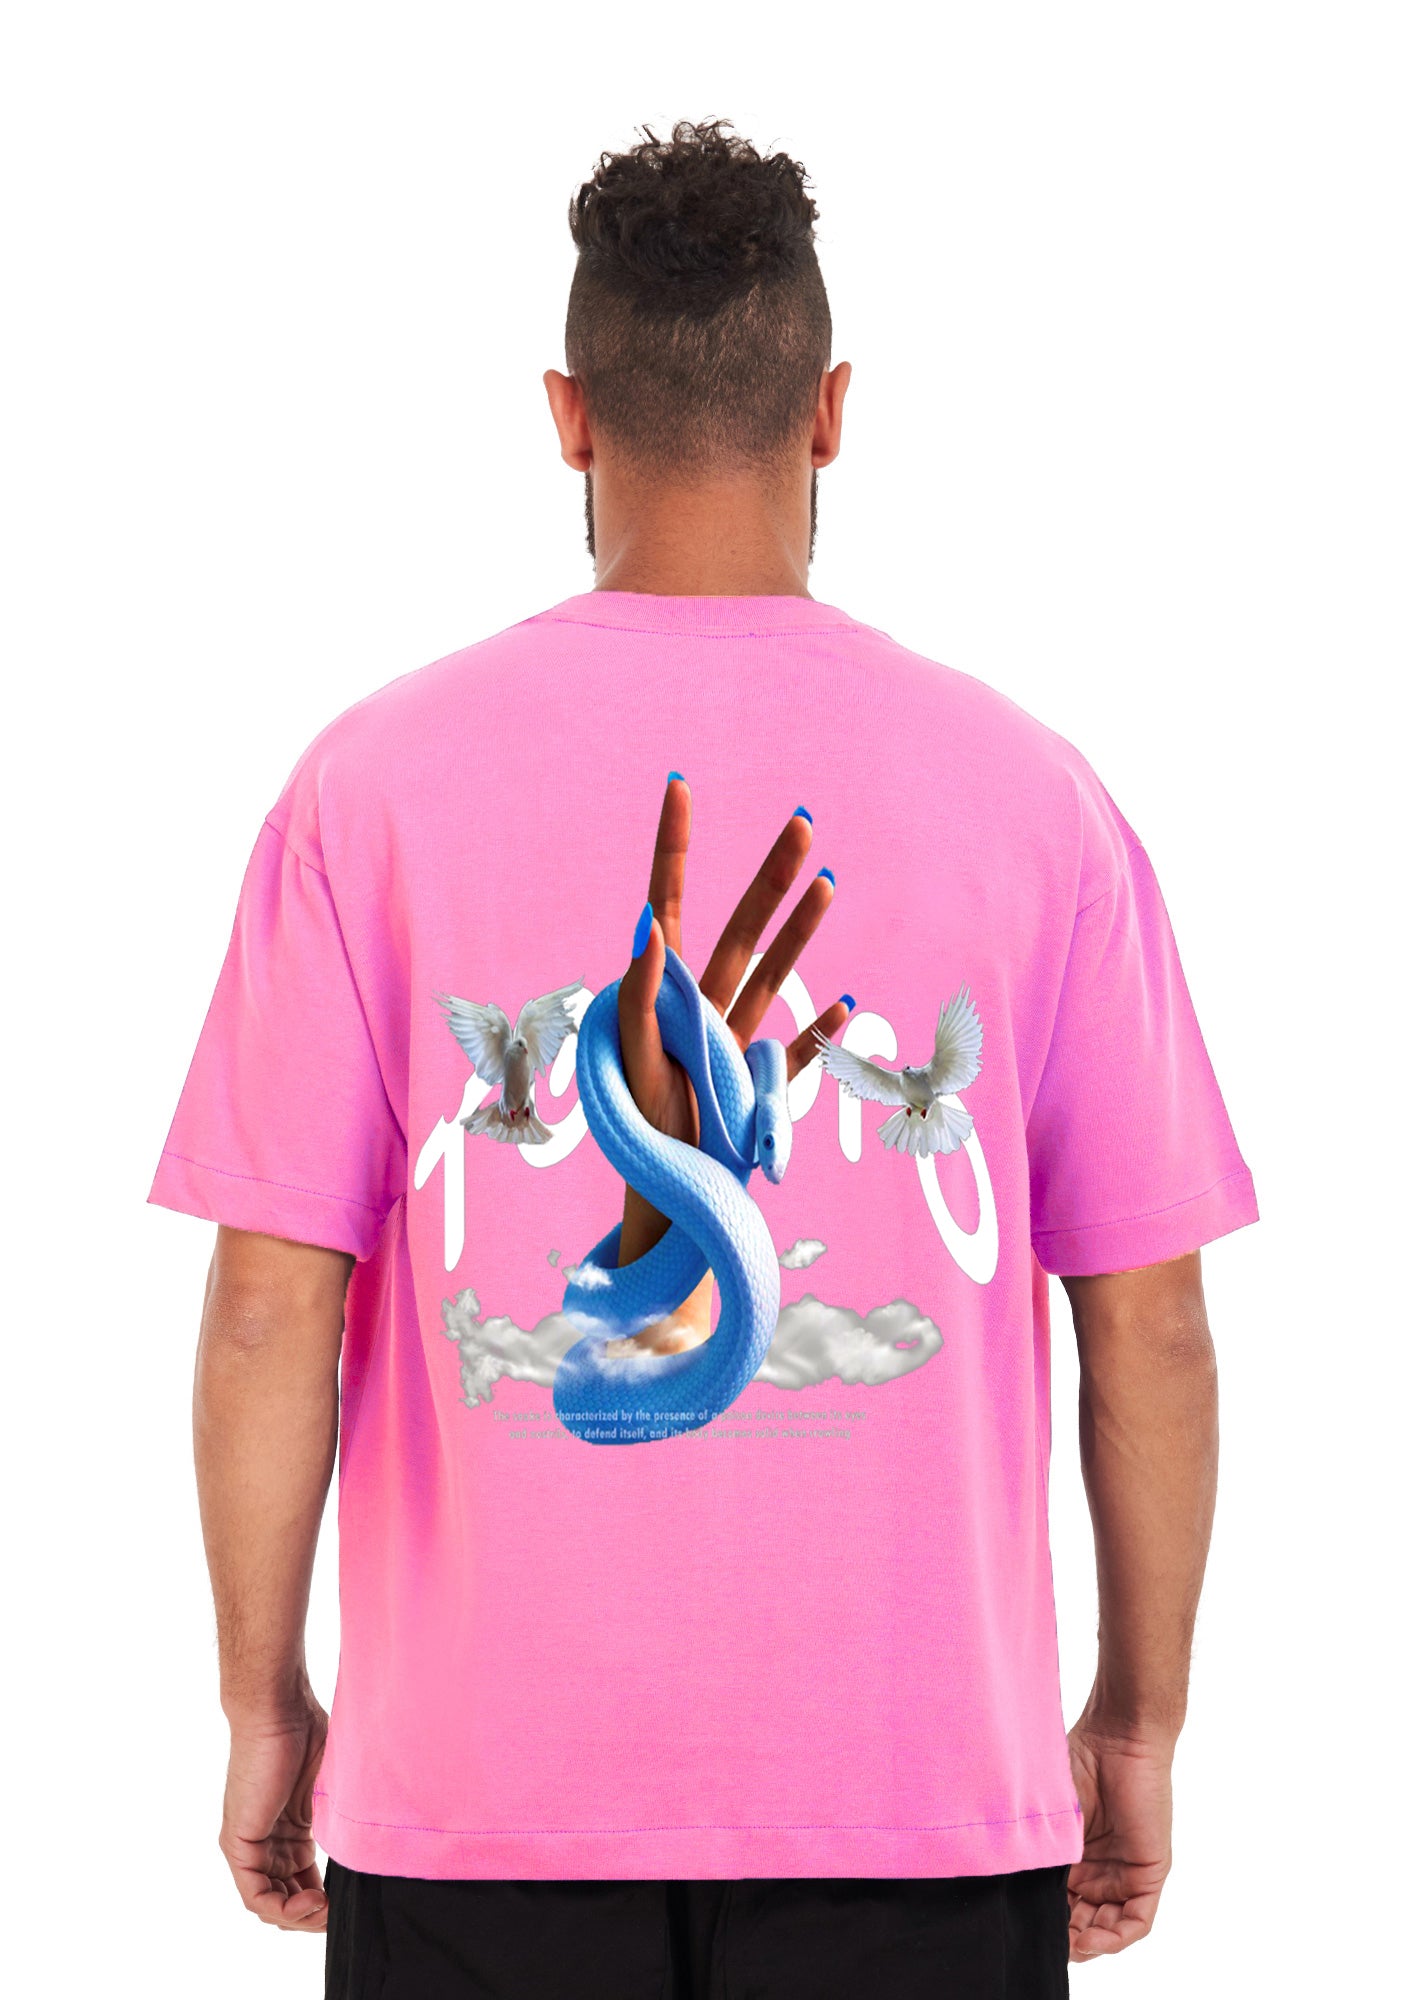 Peace tee Oversized printed Pink T-shirt .